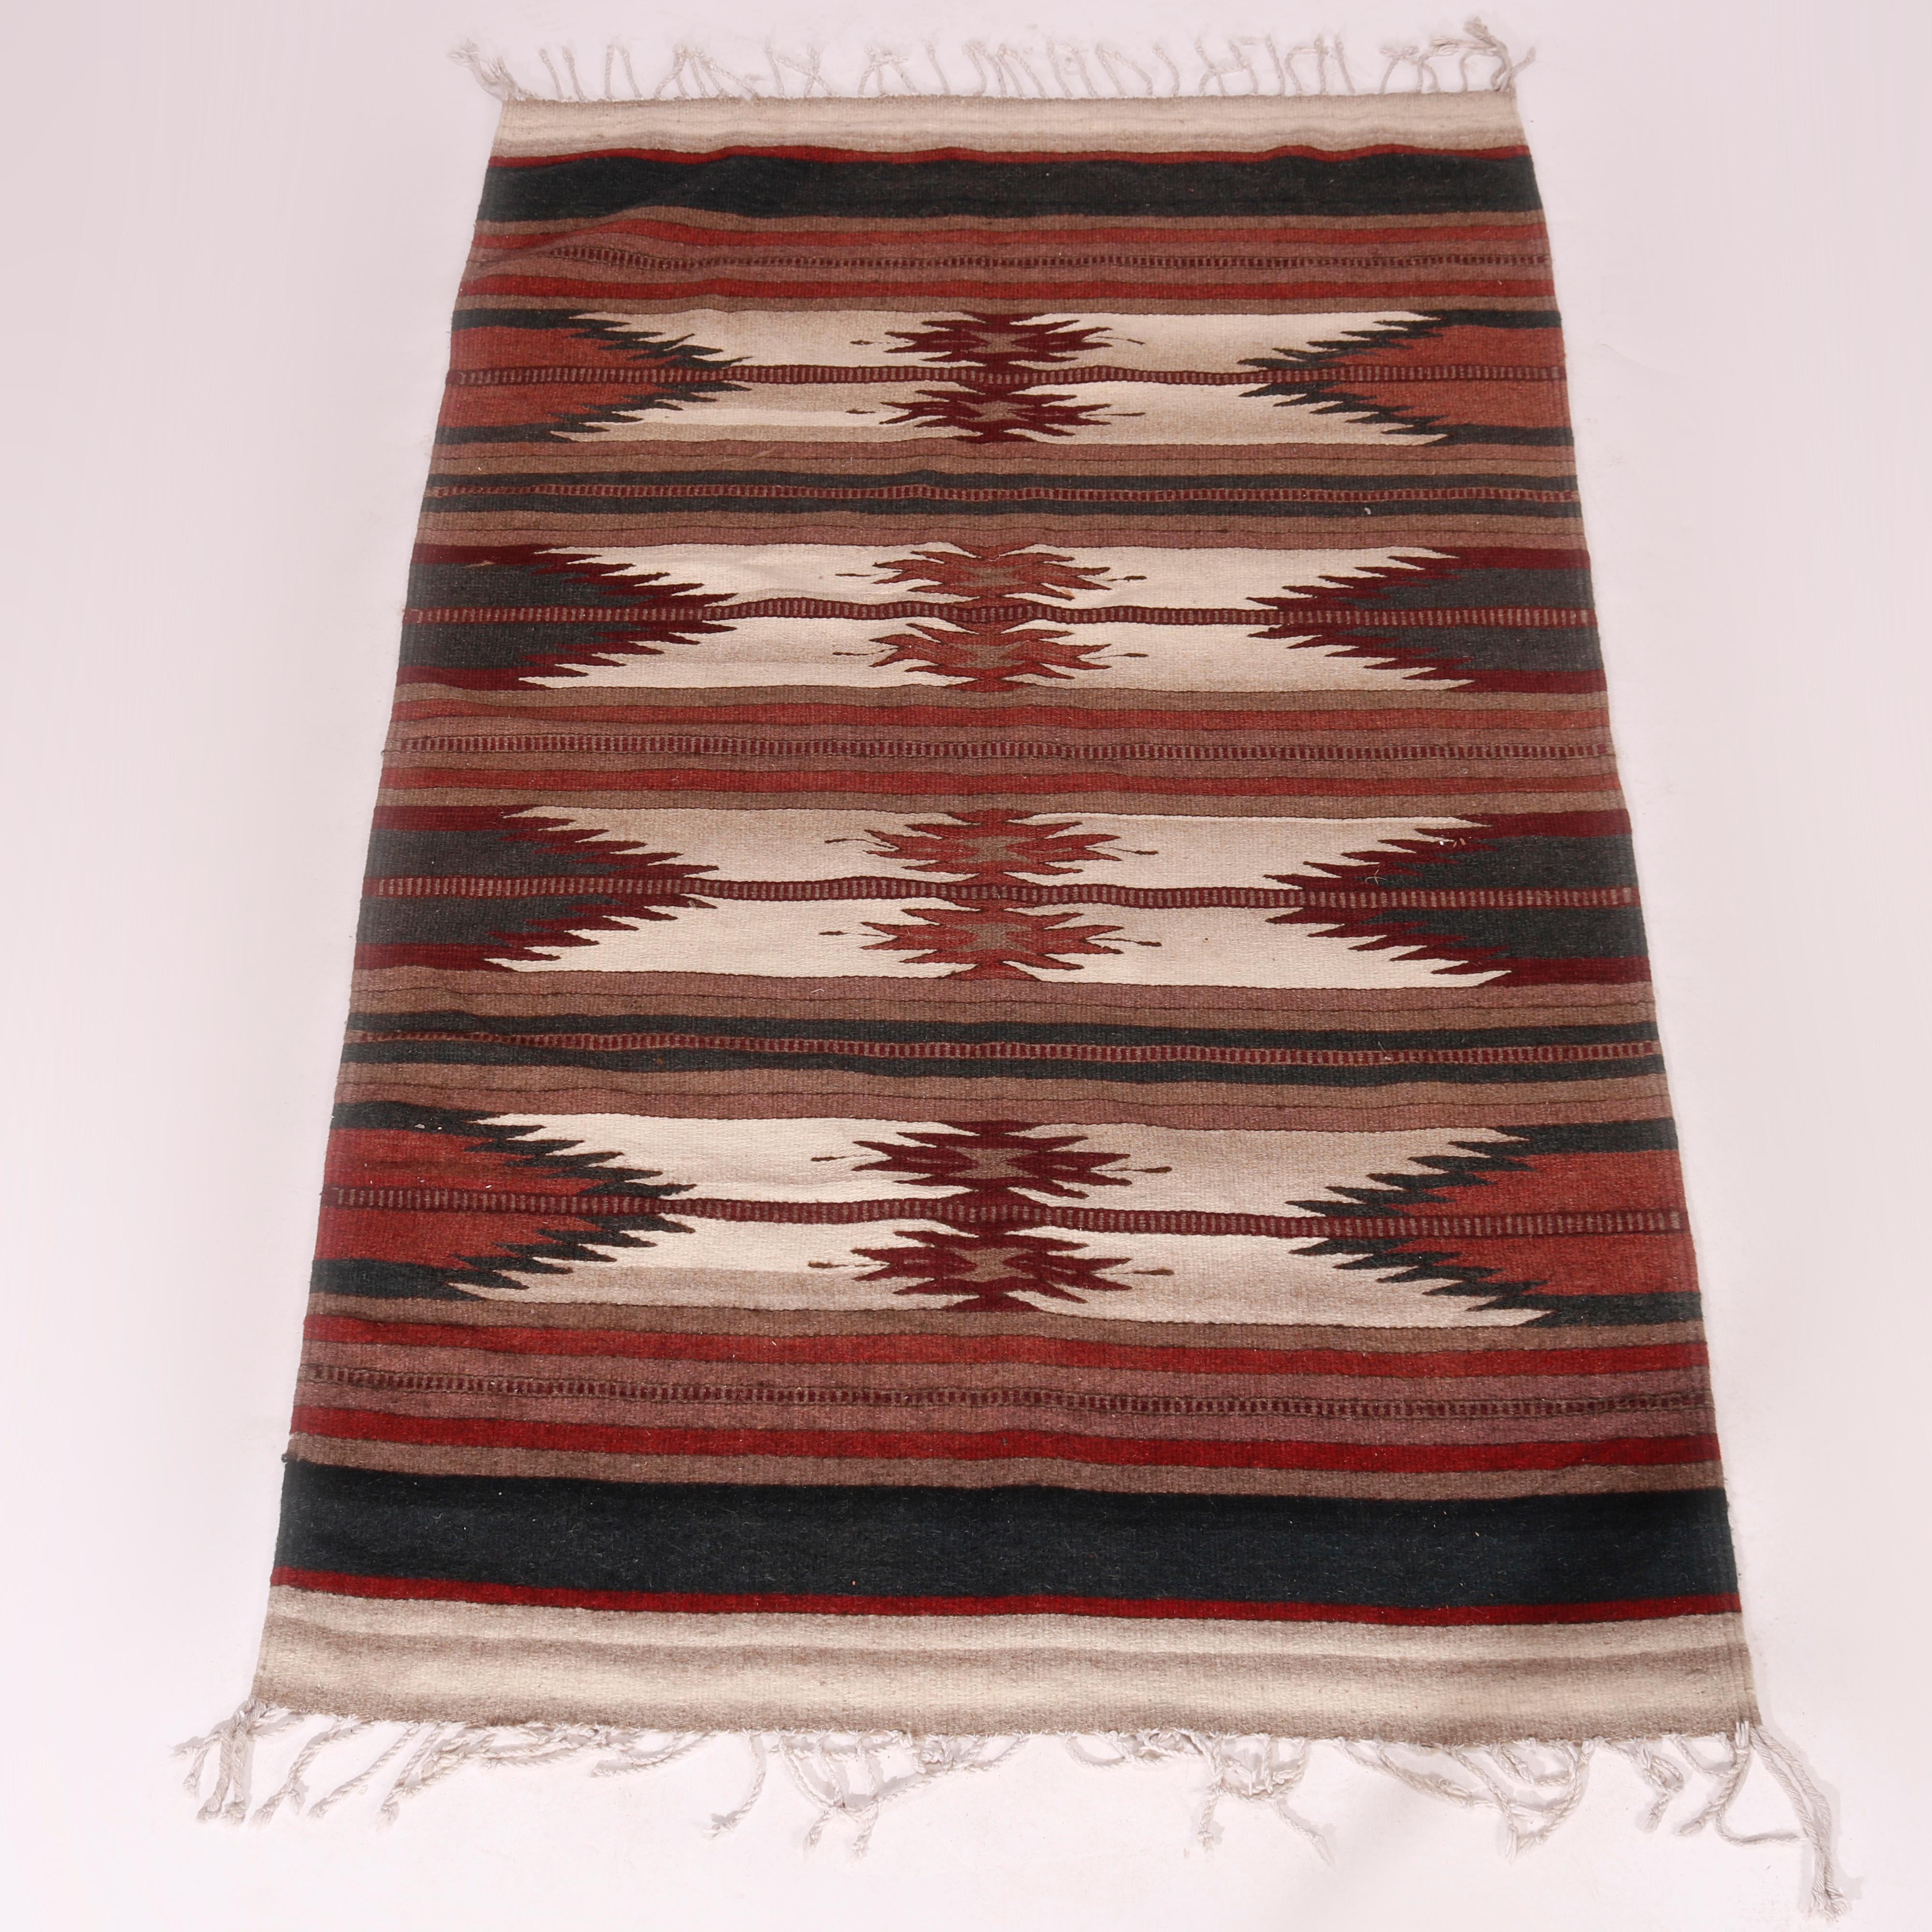 An antique Southwestern Native American Indian style rug offers striped serrated eye dazzle design, c1930

Measures - 76.5''L x 45.5'' W x .5'' D.
 
Catalogue Note: Ask about DISCOUNTED DELIVERY RATES available to most regions within 1,500 miles of